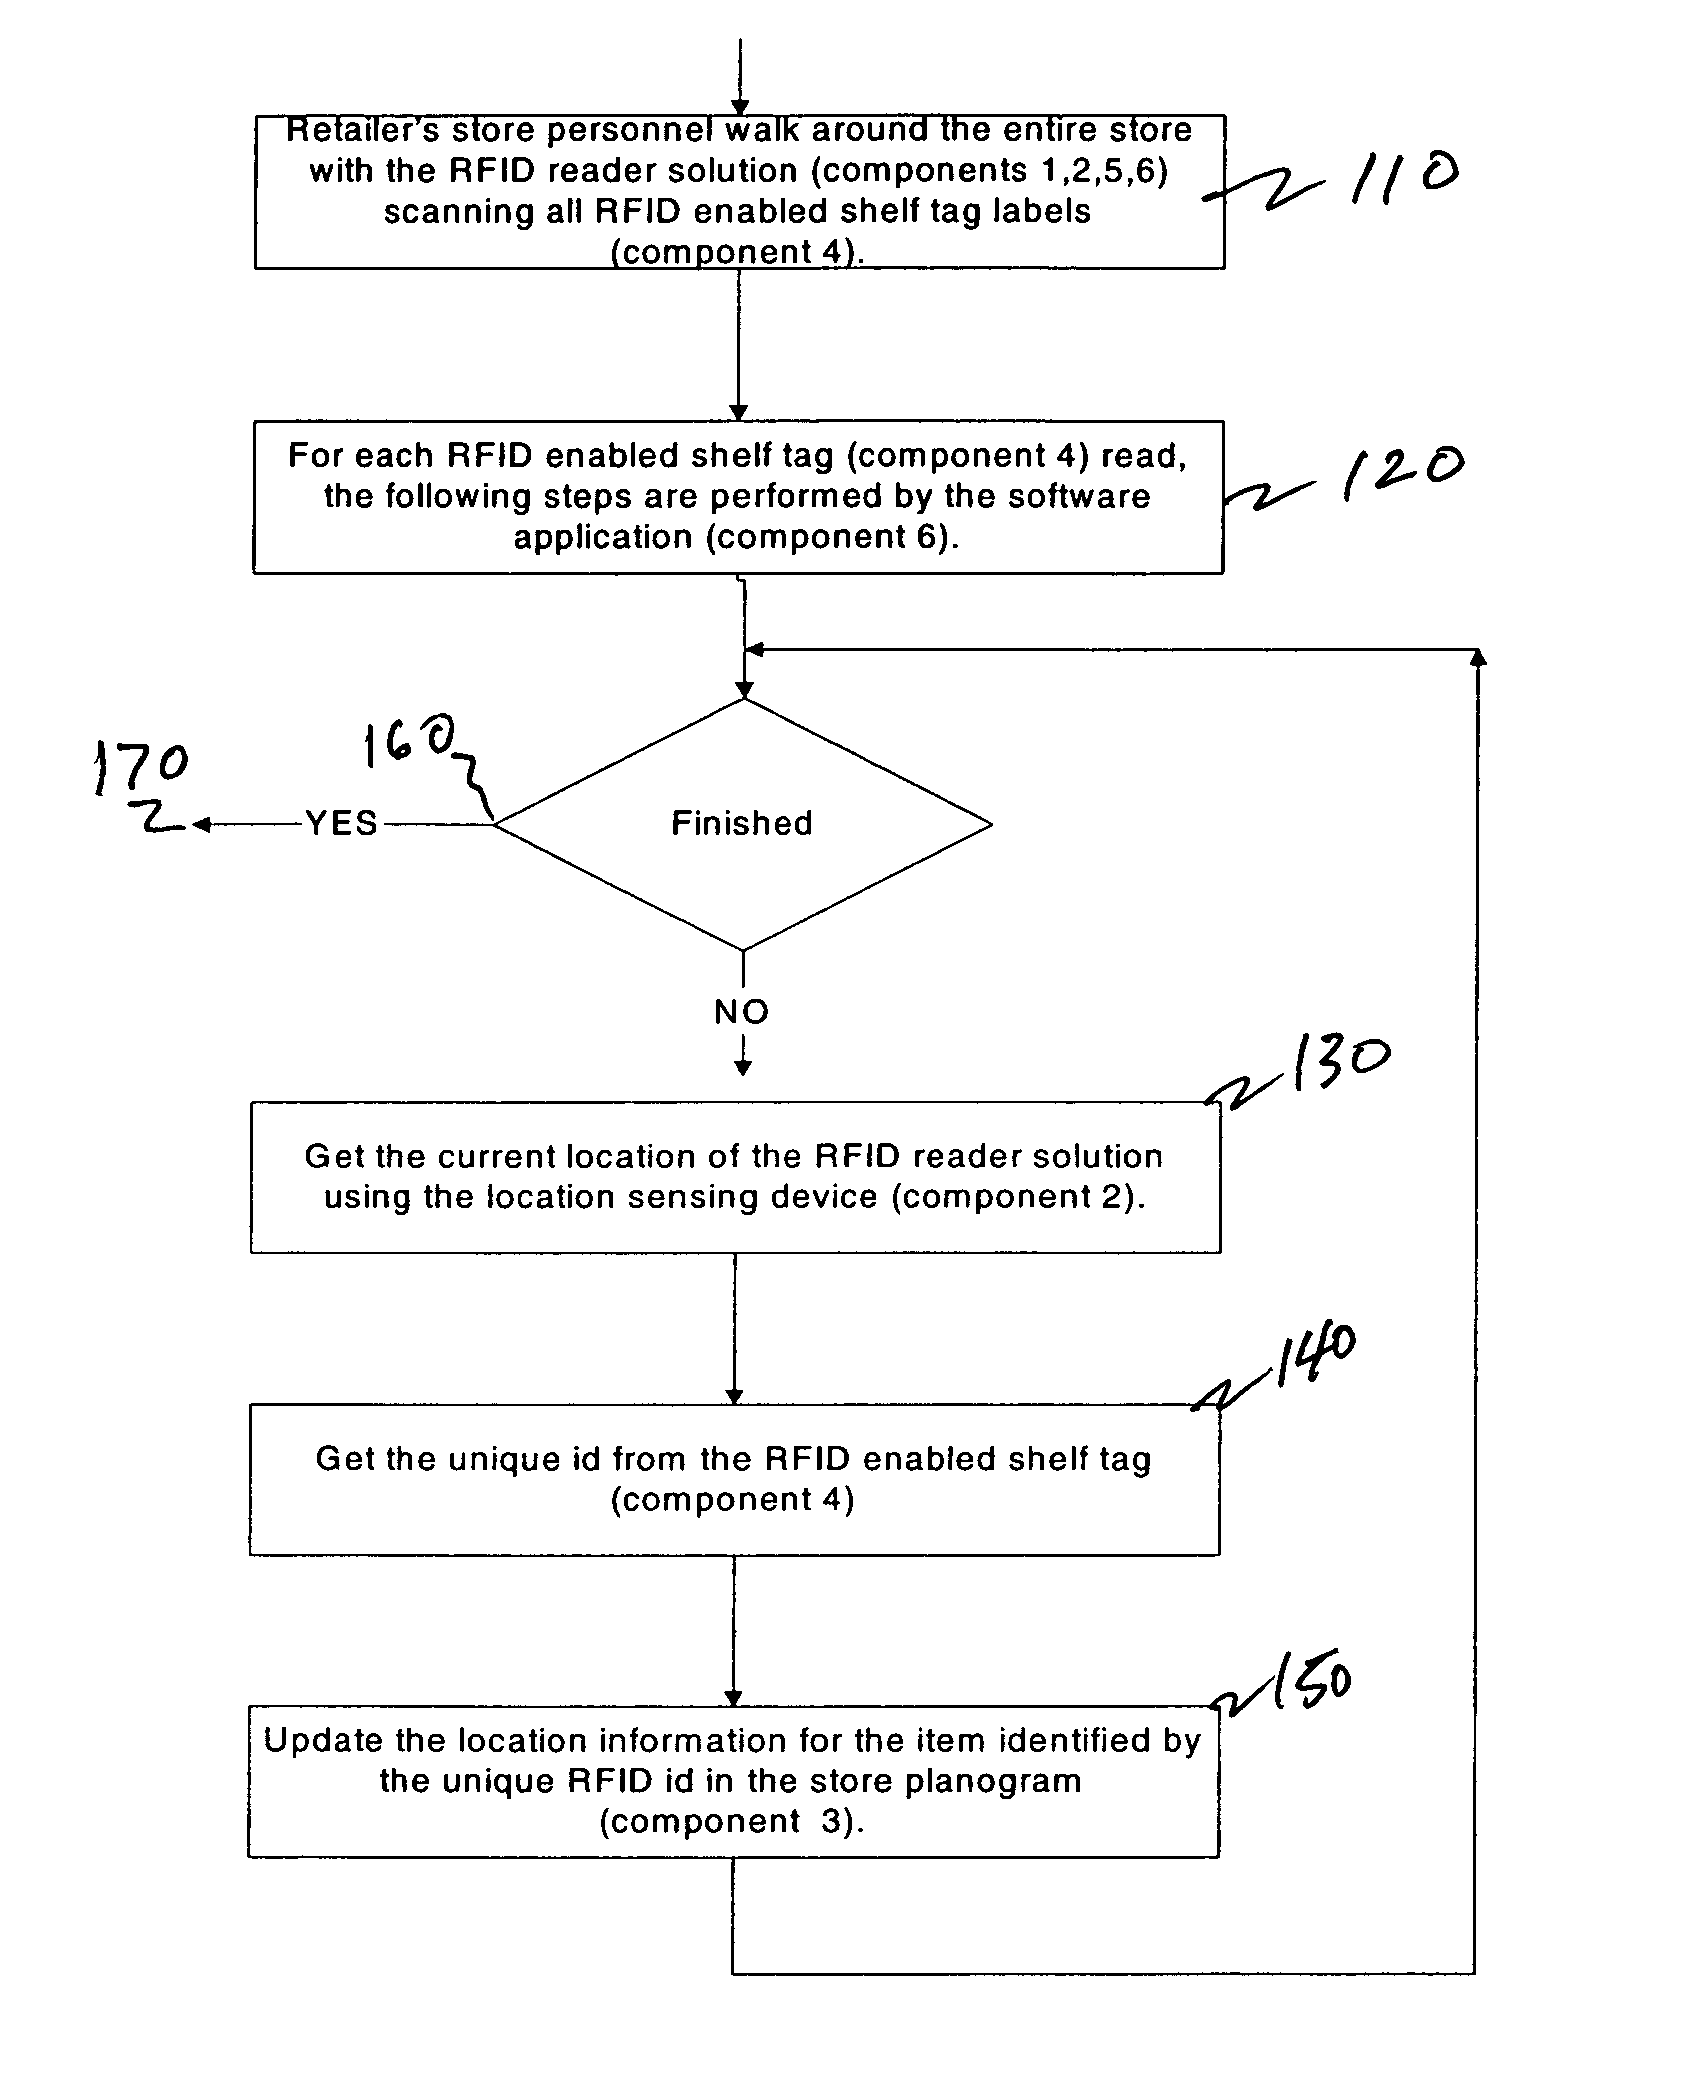 System & method of updating planogram information using RFID tags and personal shopping device